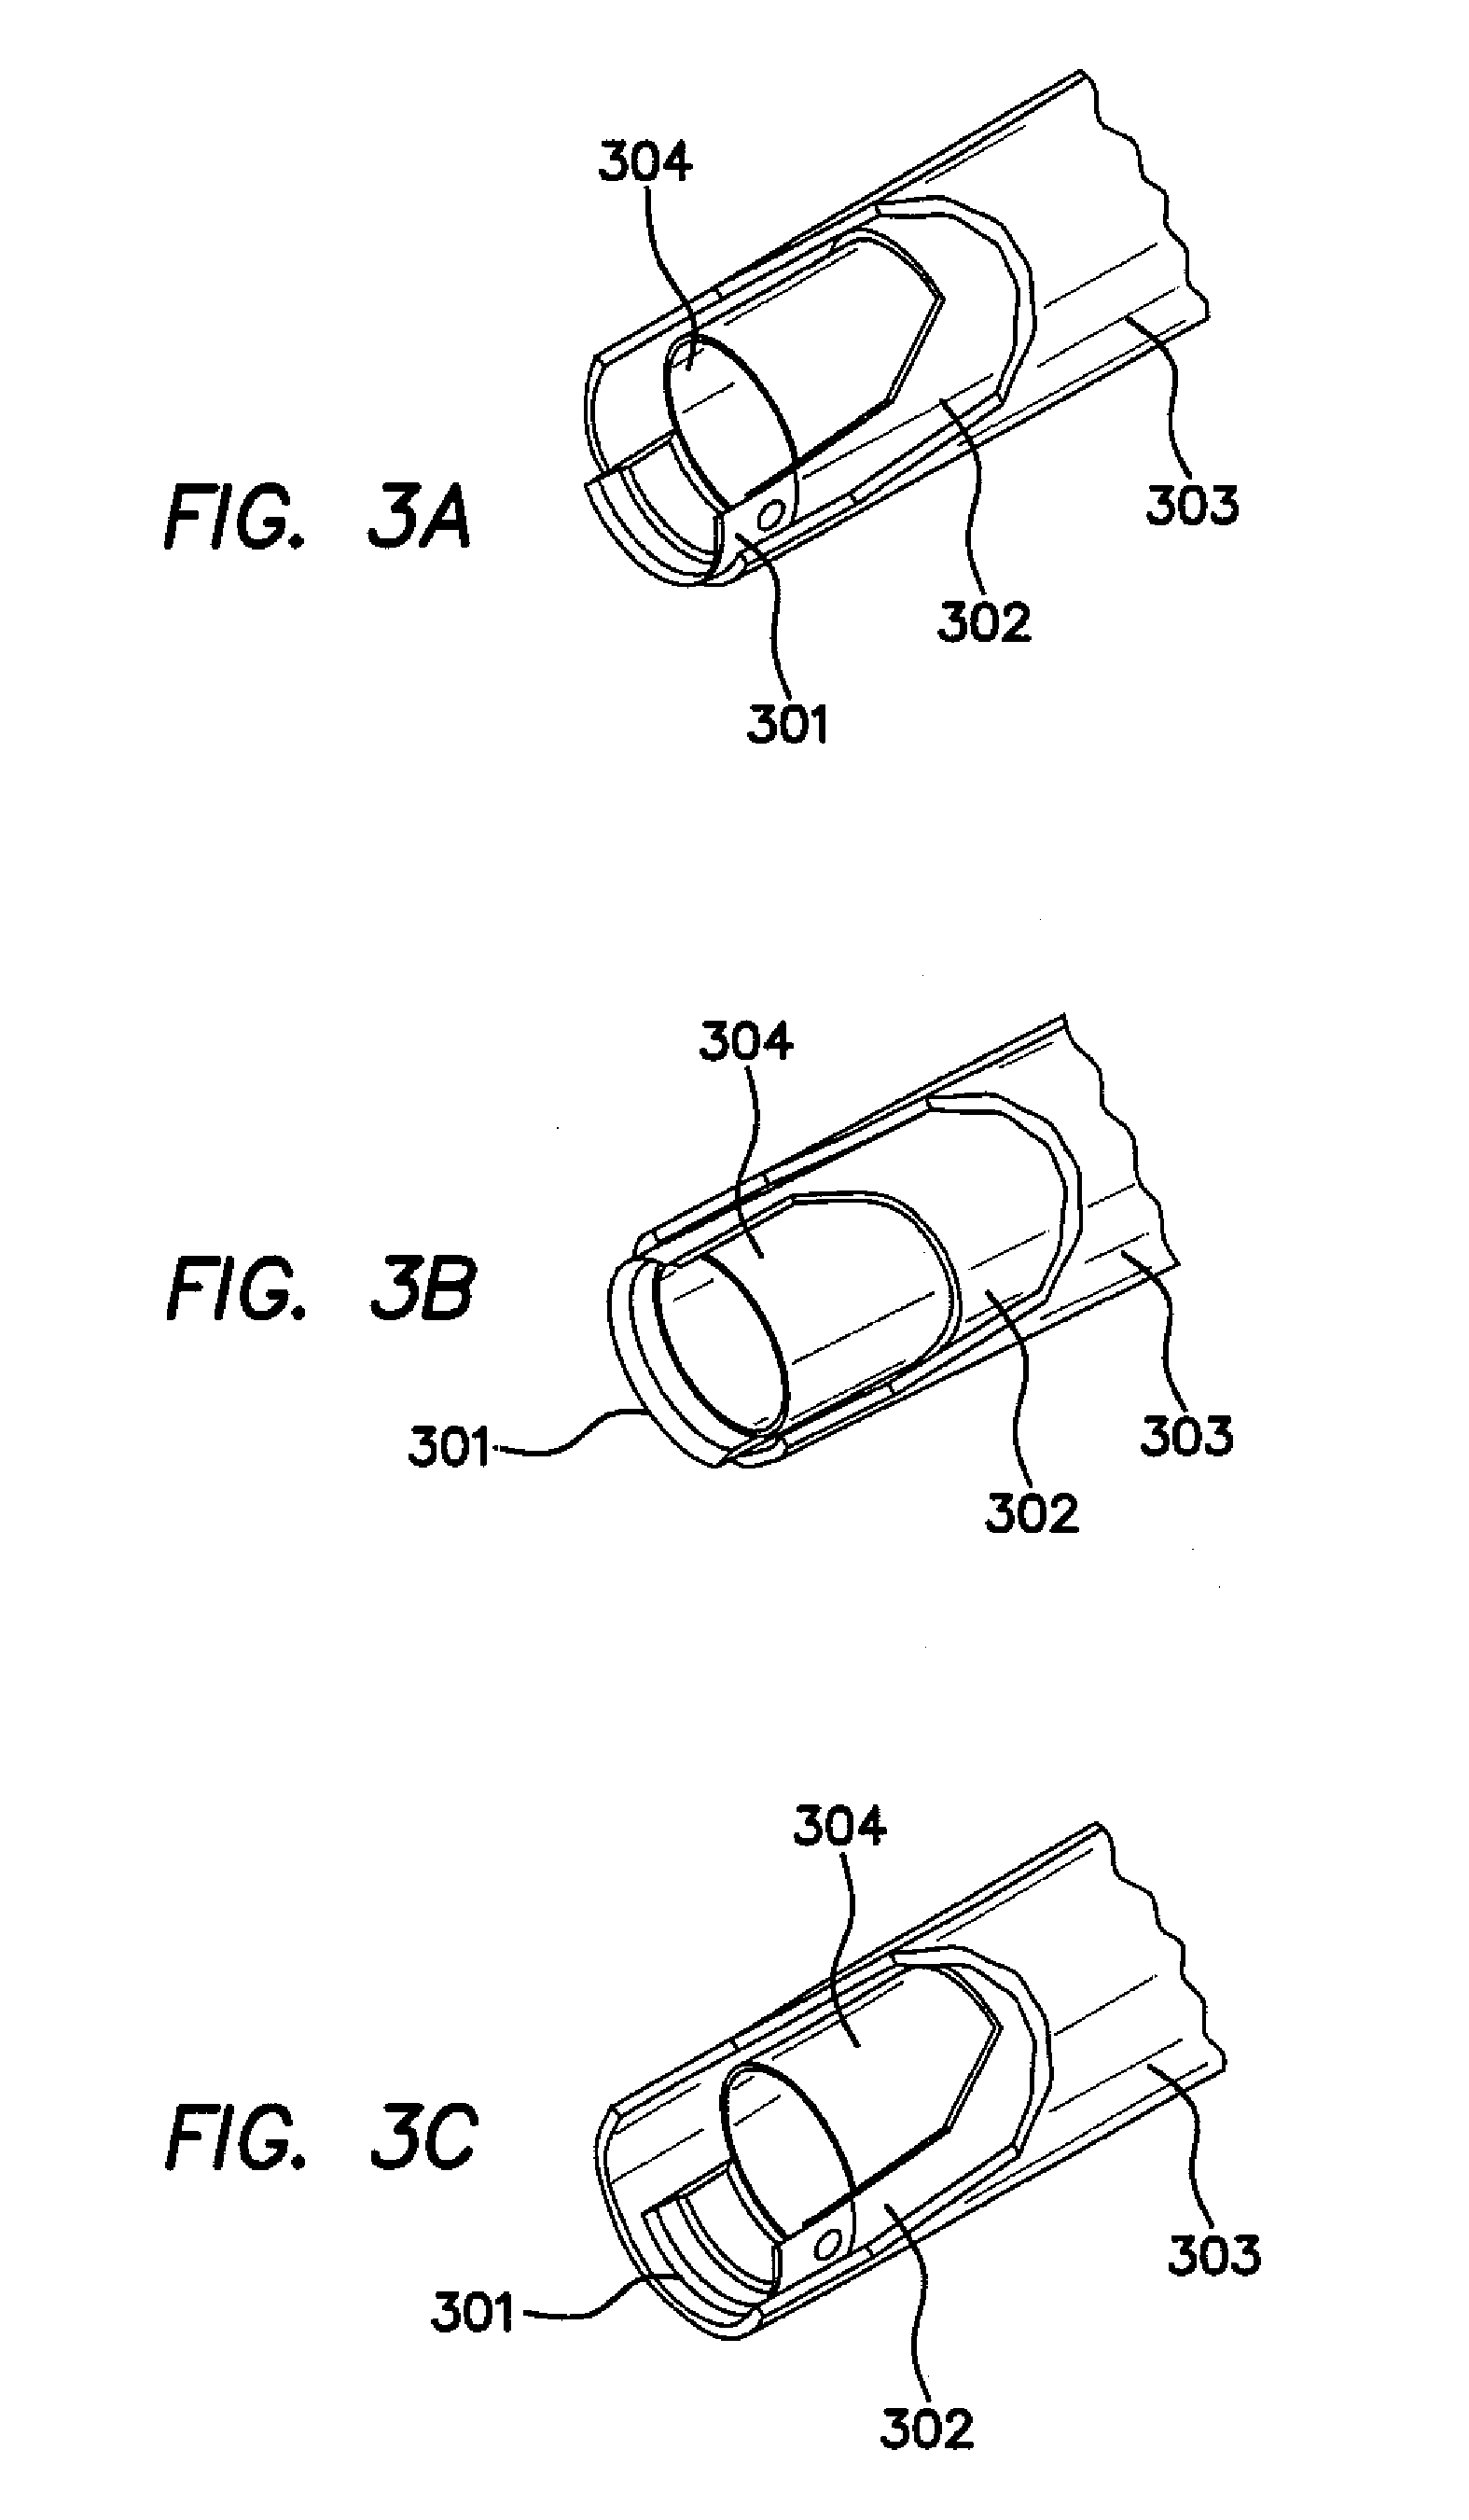 Method and apparatus for tissue morcellation